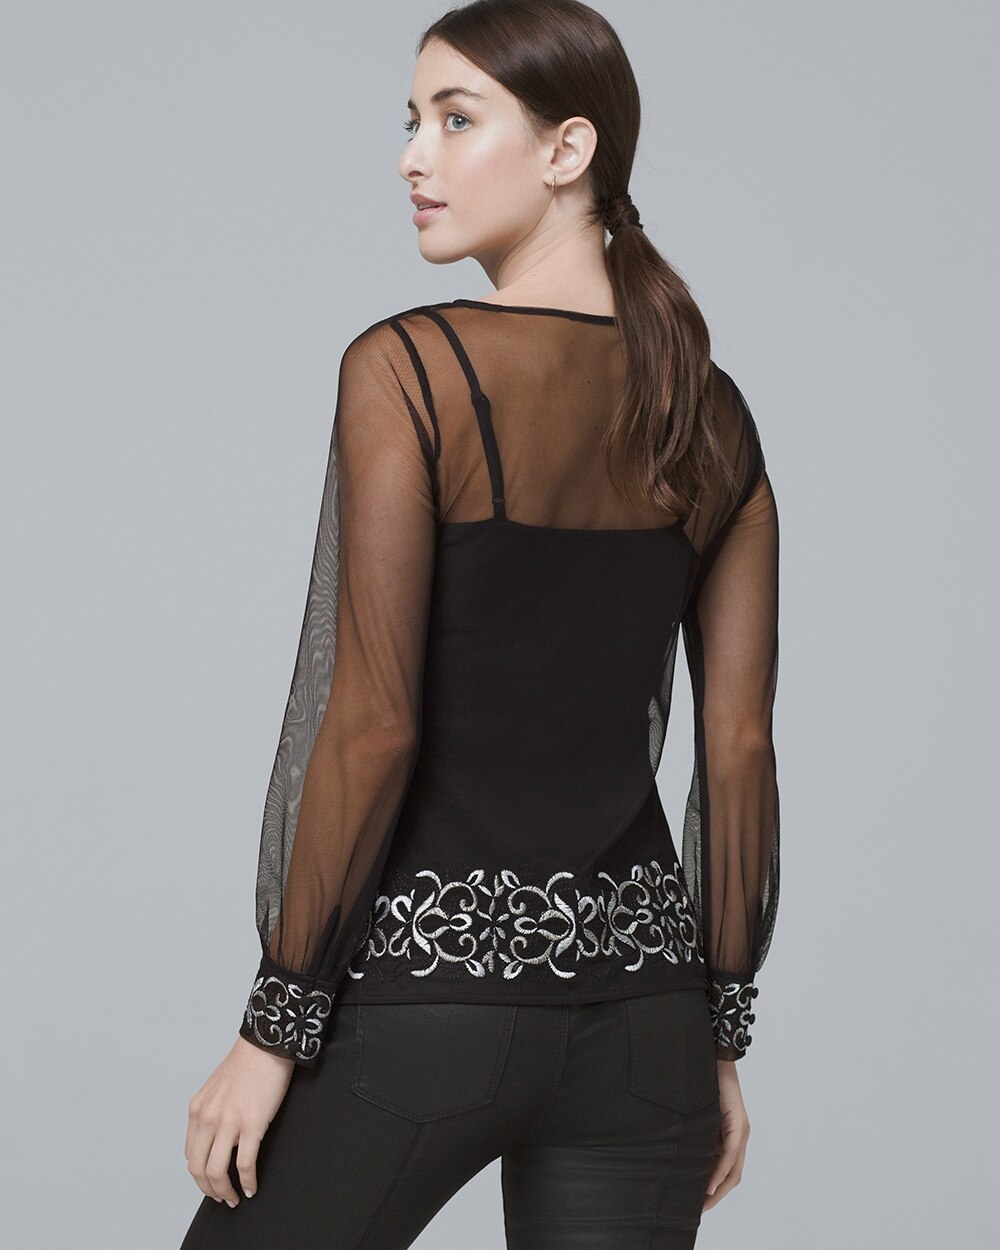 Floral-Embroidered Mesh Top - White House Black Market